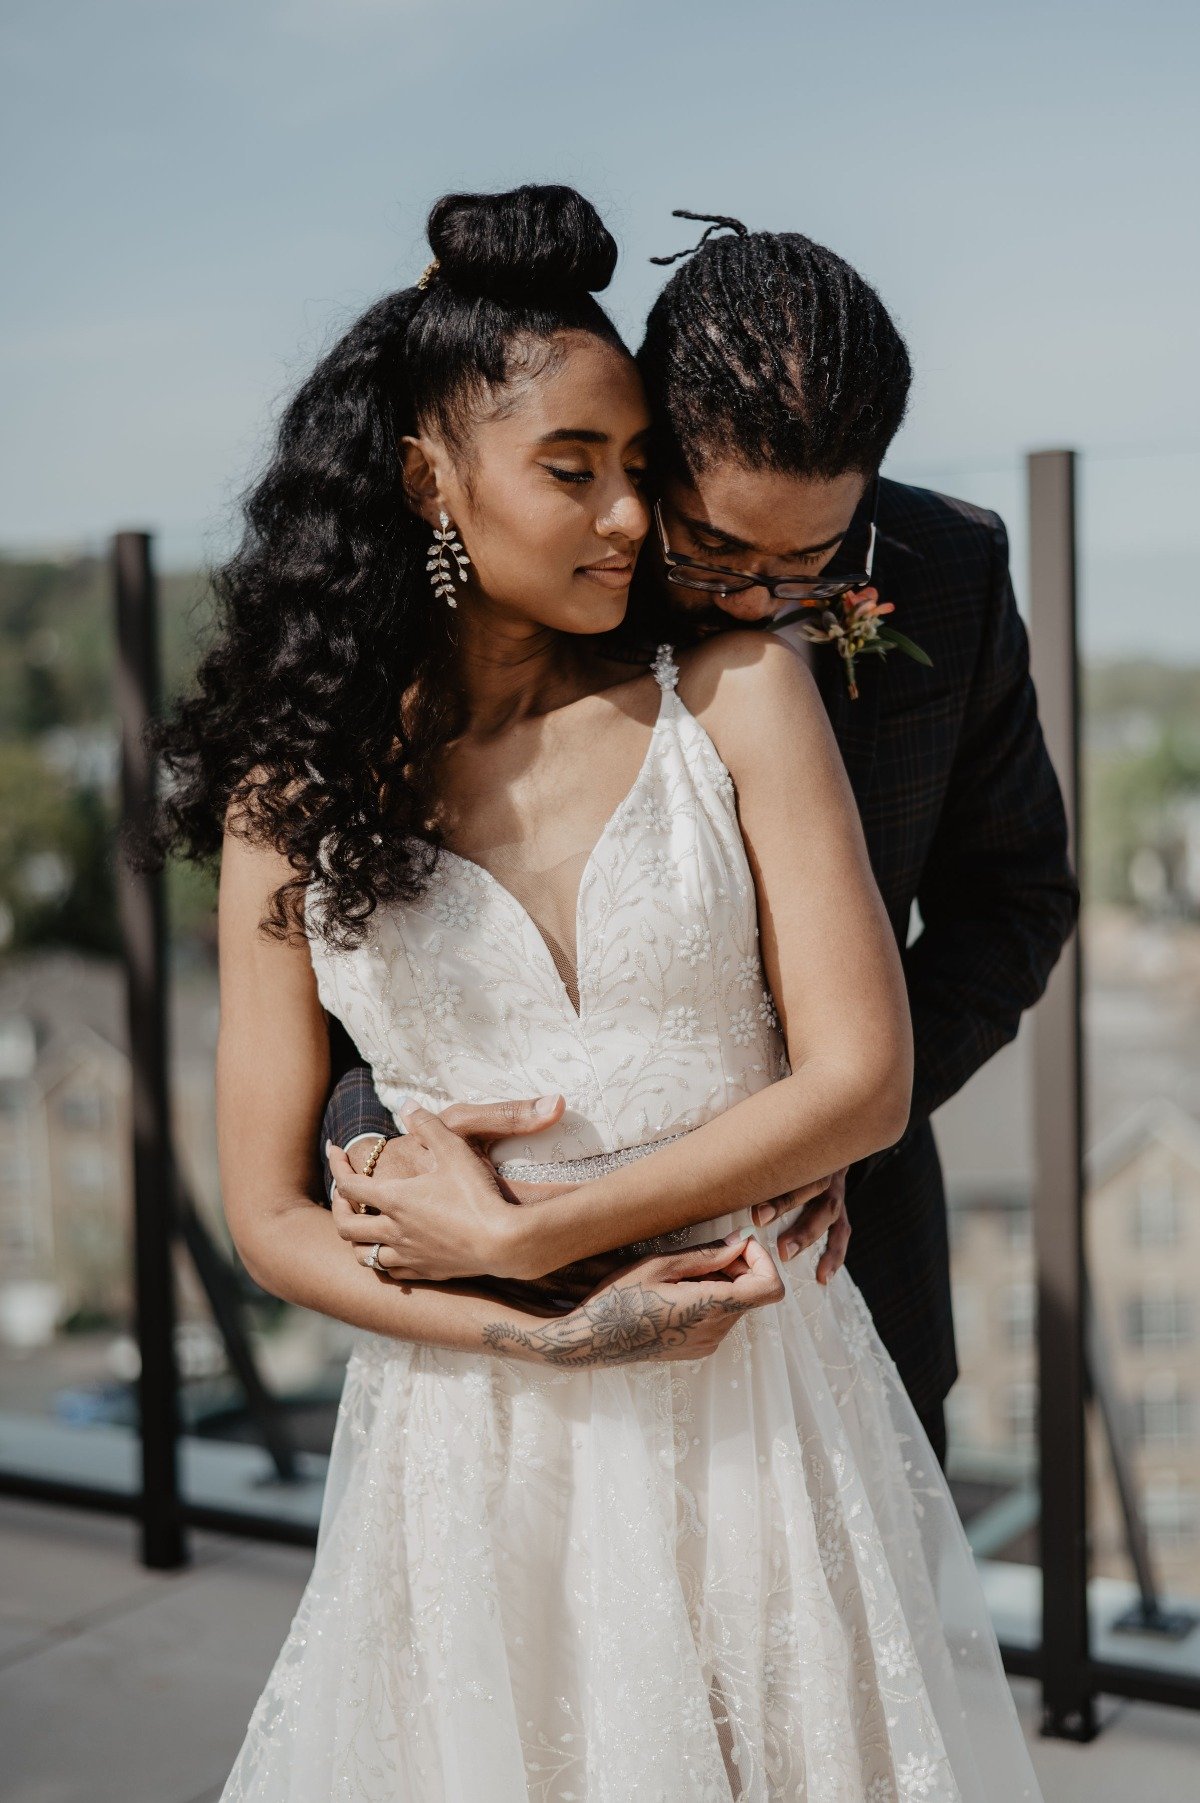 Fun and Colorful Rooftop Micro Wedding at a Modern Boutique Hotel with NYC views